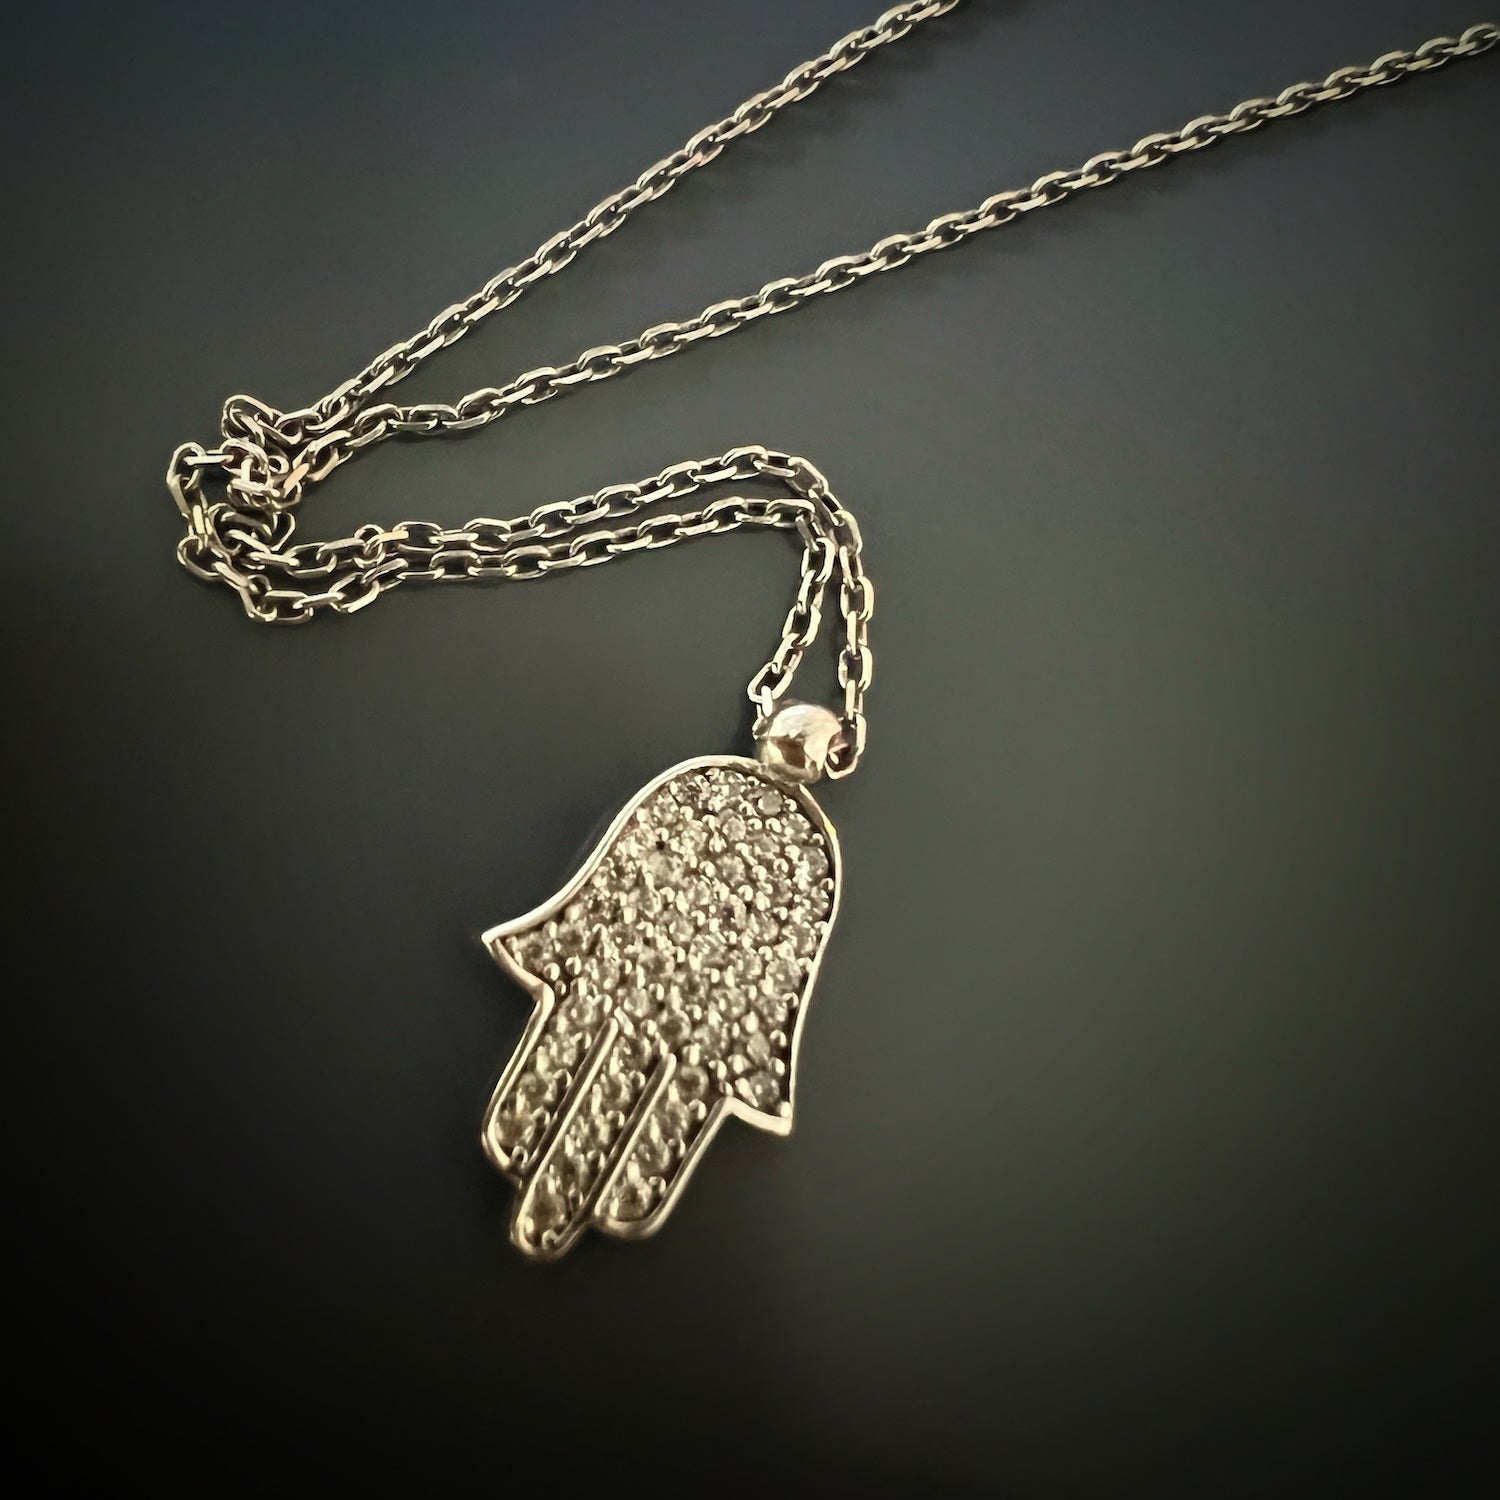 Gold Plated Hamsa Talisman Necklace - Add a touch of luxury to your jewelry collection with this 18k gold plated Hamsa necklace, adorned with a sparkling zircon stone.